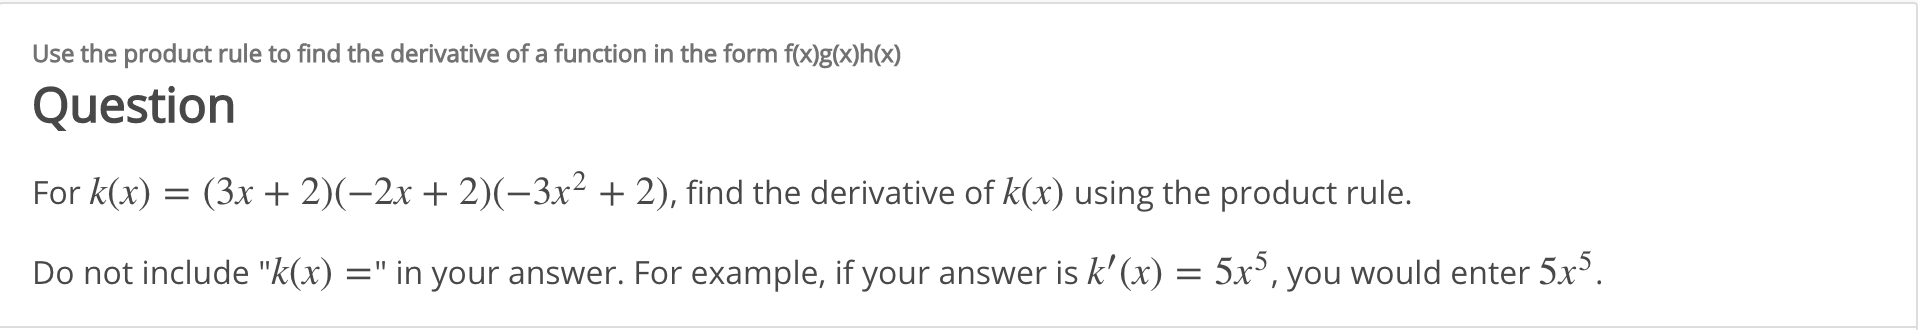 Use the product rule to find the derivative of a function in the form f(x)g(x)h(x)
Question
For k(x) = (3x + 2)(-2x + 2)(-3x² + 2), find the derivative of k(x) using the product rule.
Do not include "k(x) =" in your answer. For example, if your answer is k' (x) = 5x³, you would enter 5x°.
